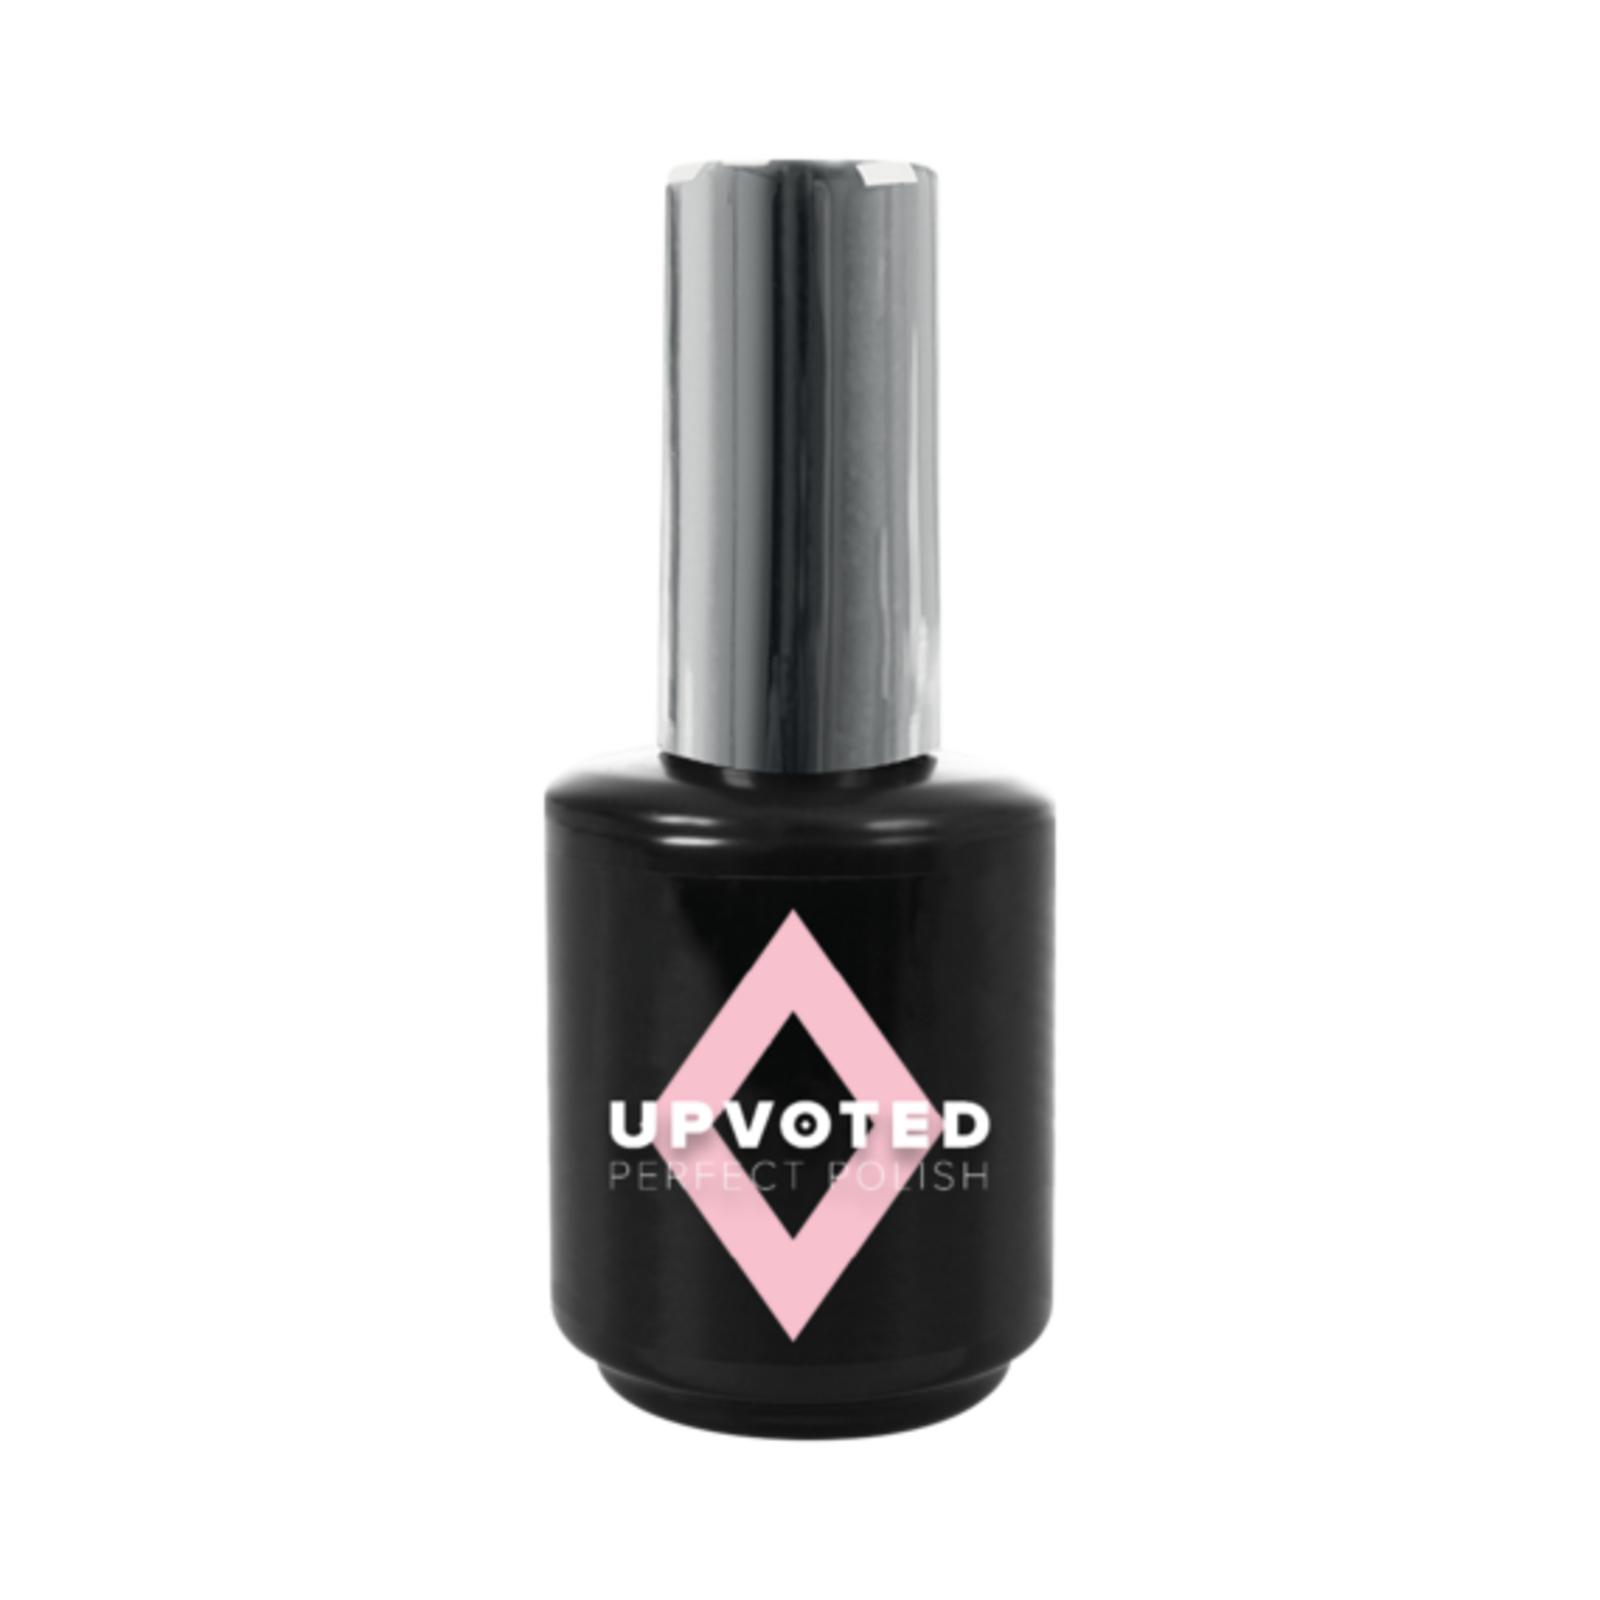 NailPerfect Upvoted #235 Some Soft Pink 15ml